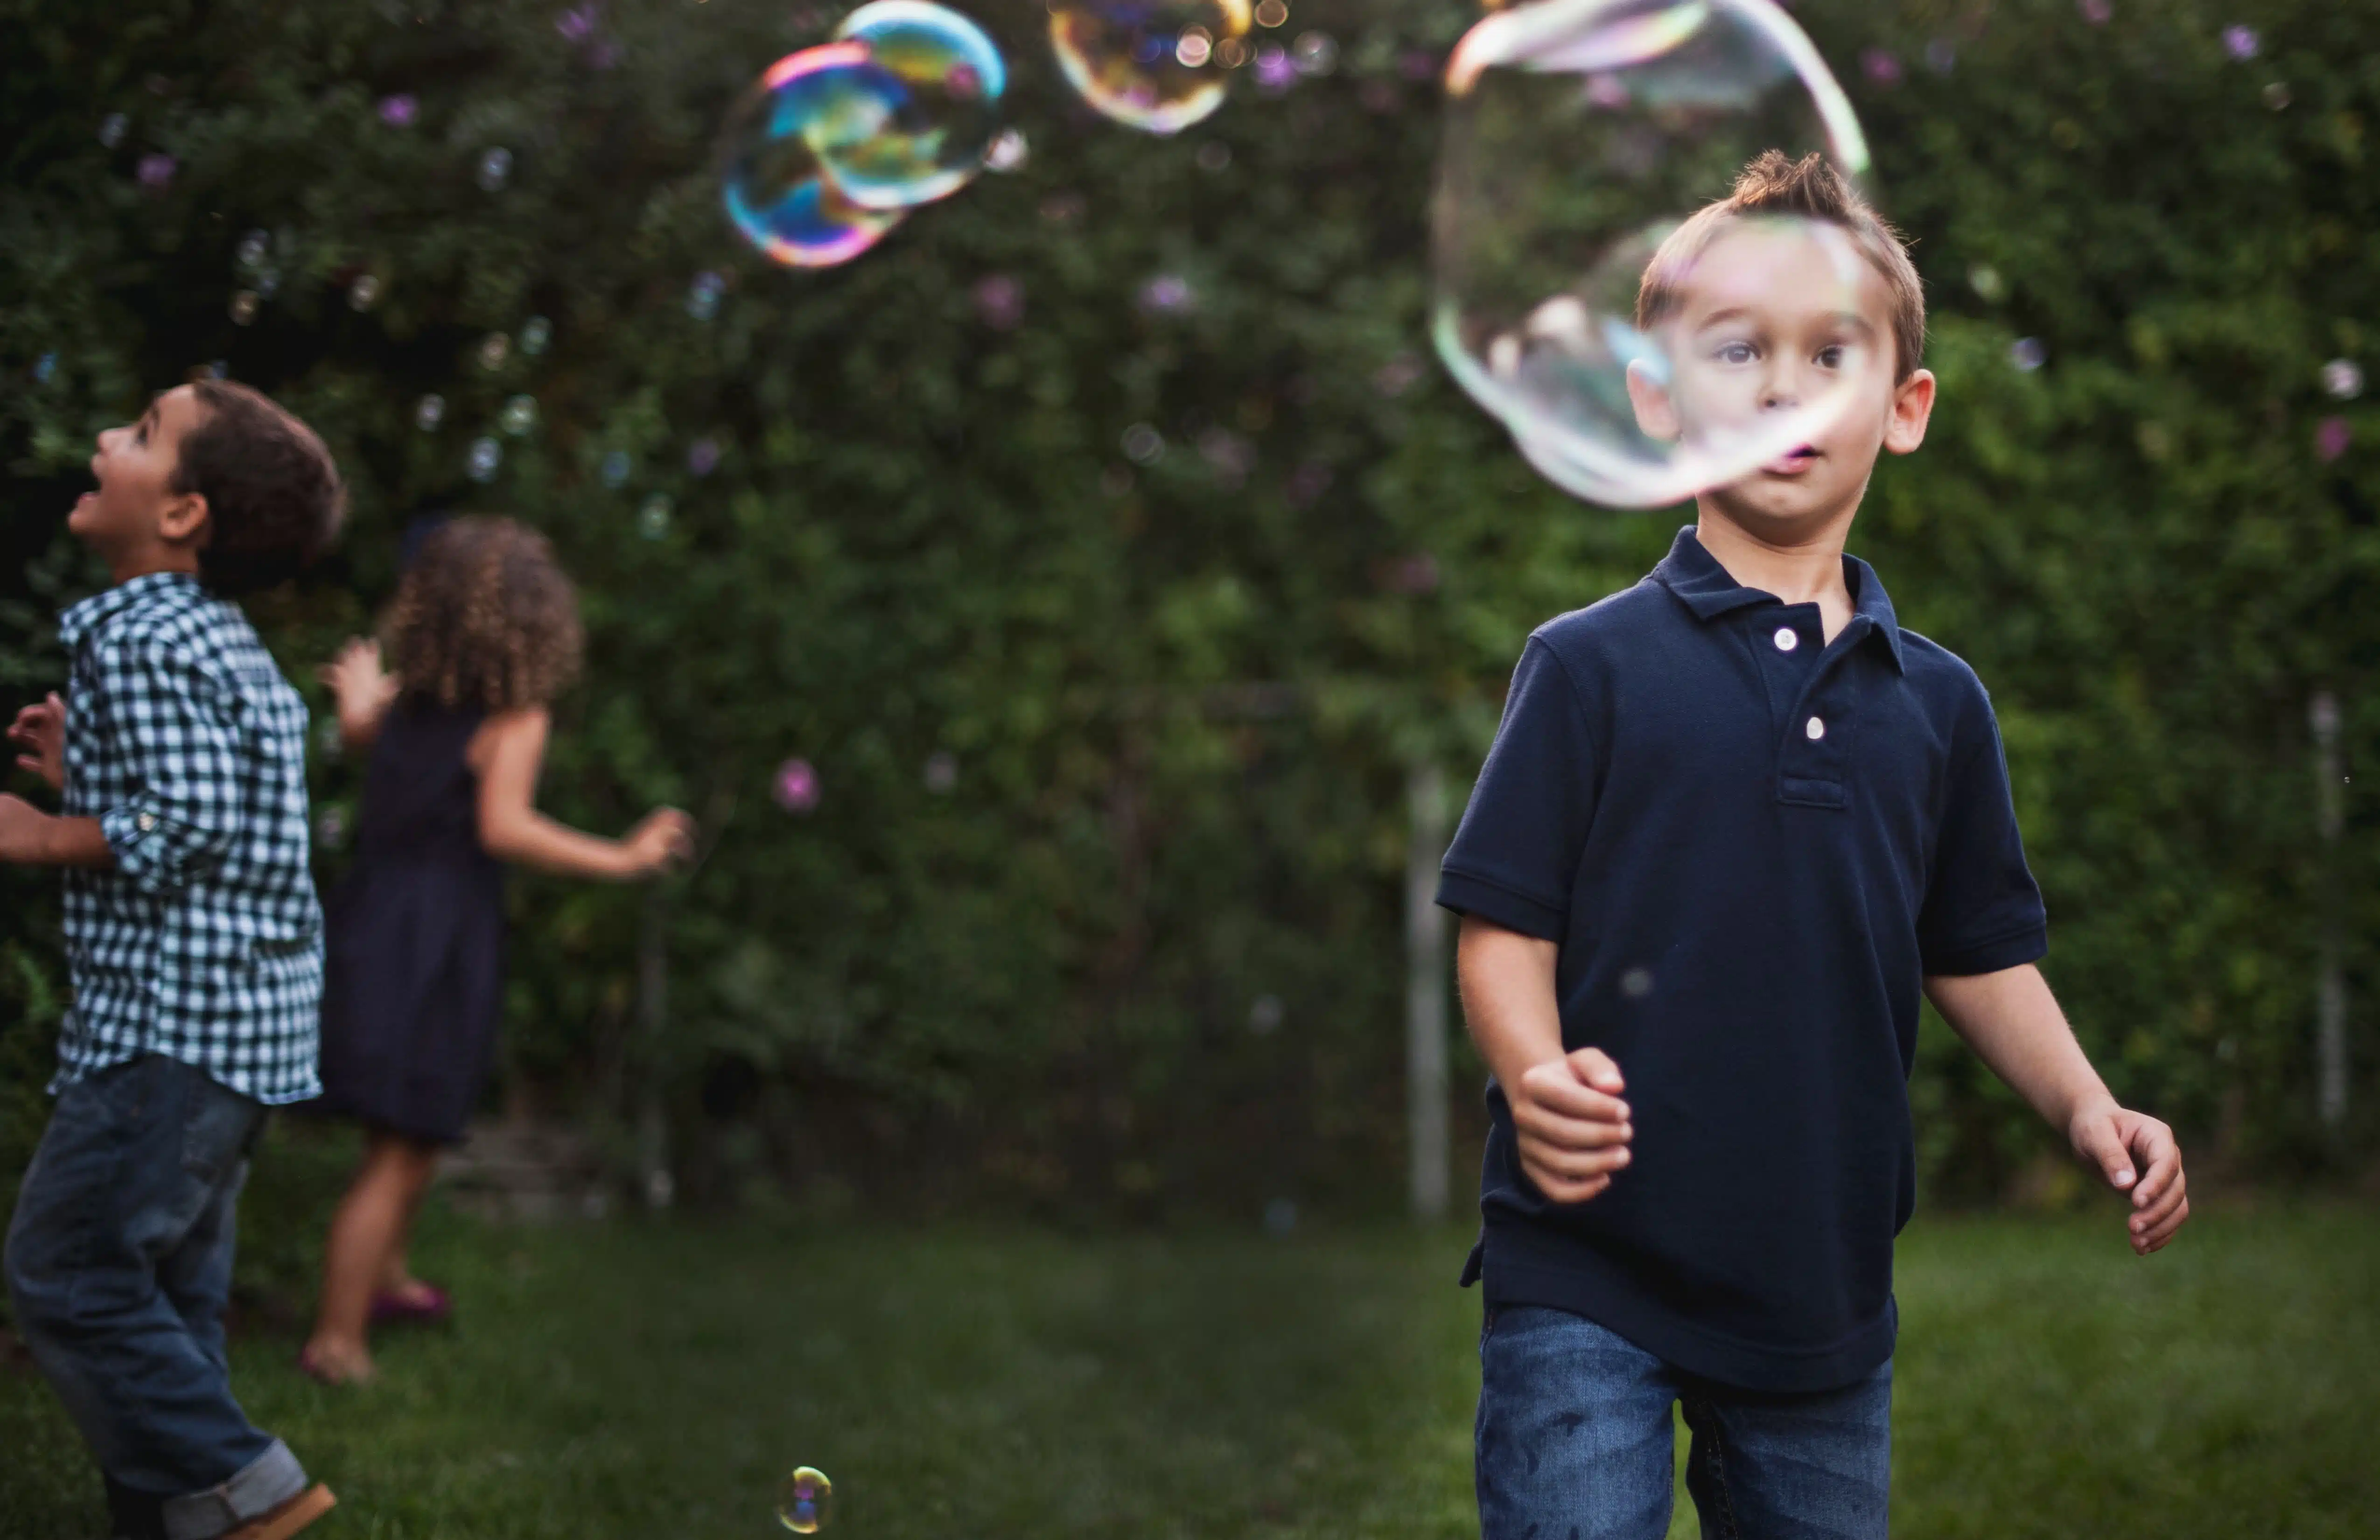 Children Playing With Bubbles